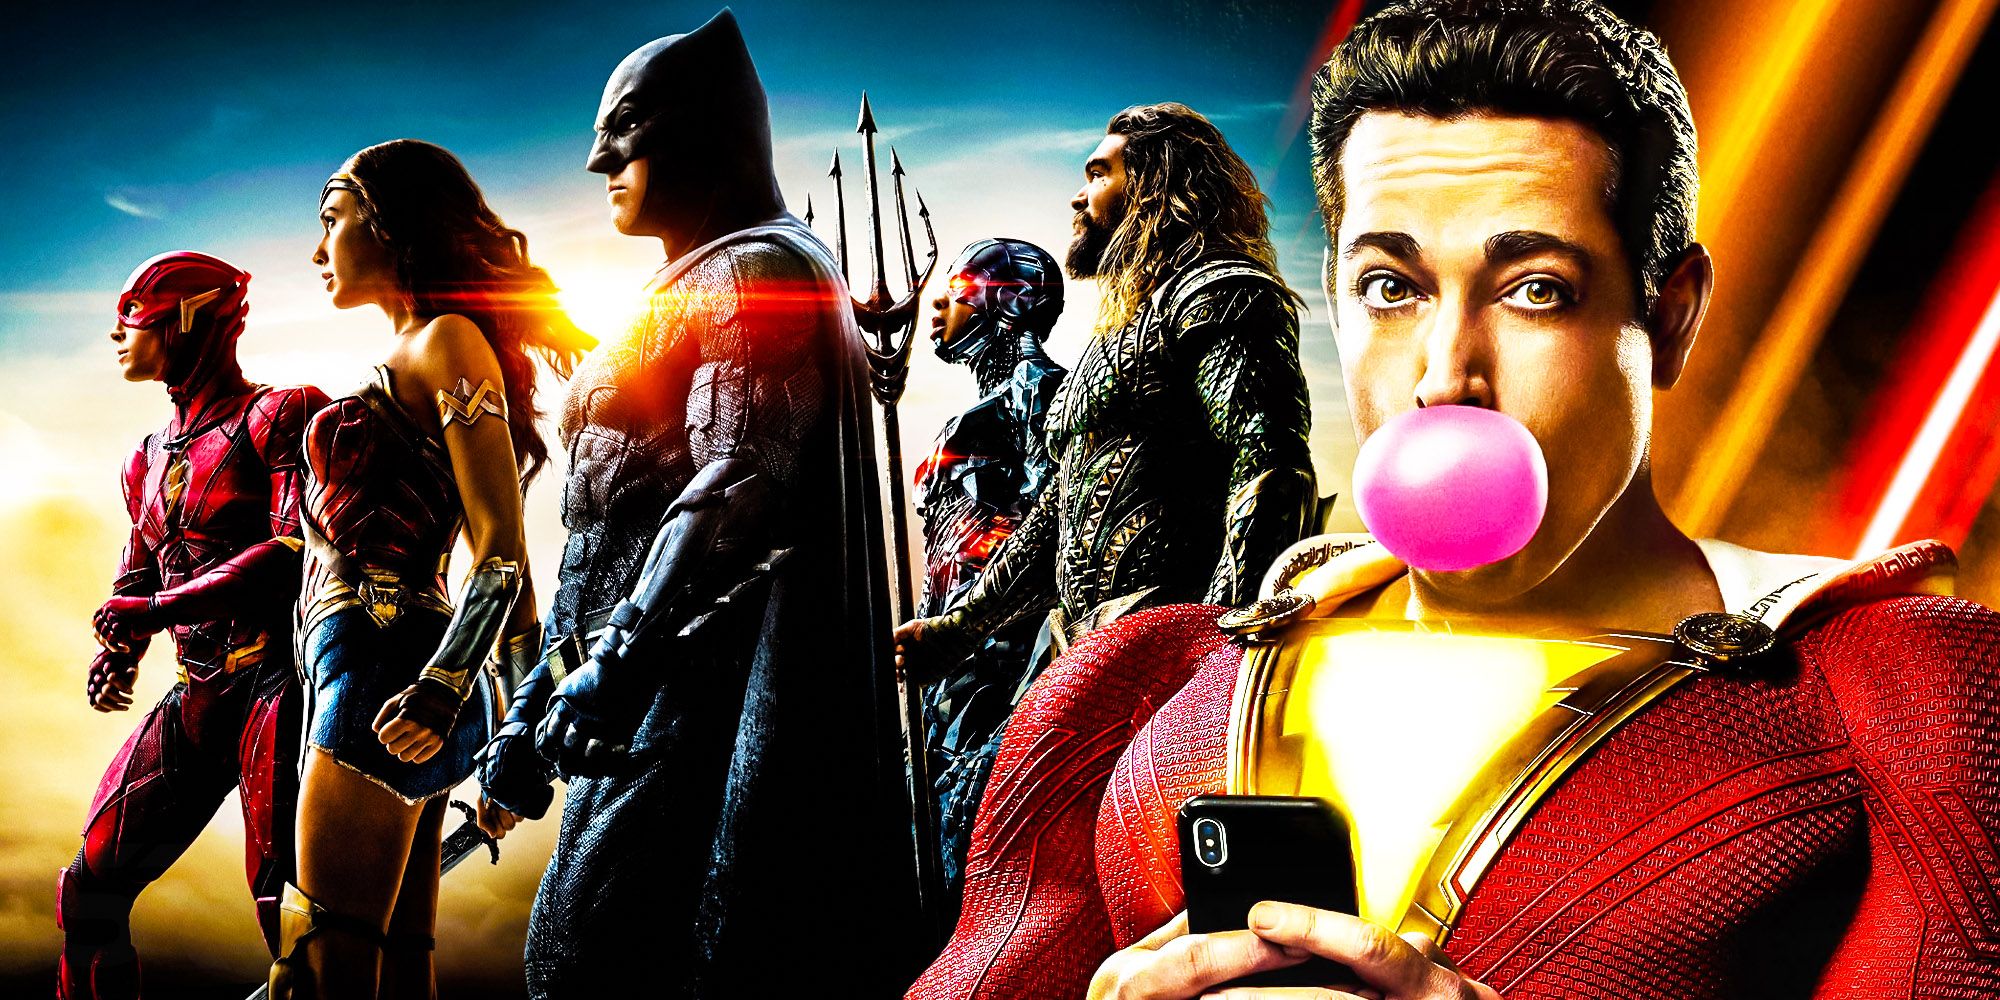 Split Image of the Justice League (Batman, the Flash, Aquaman, Wonder Woman, and Cyborg); Shazam (Zachary Levi) blows a bubble in his gm